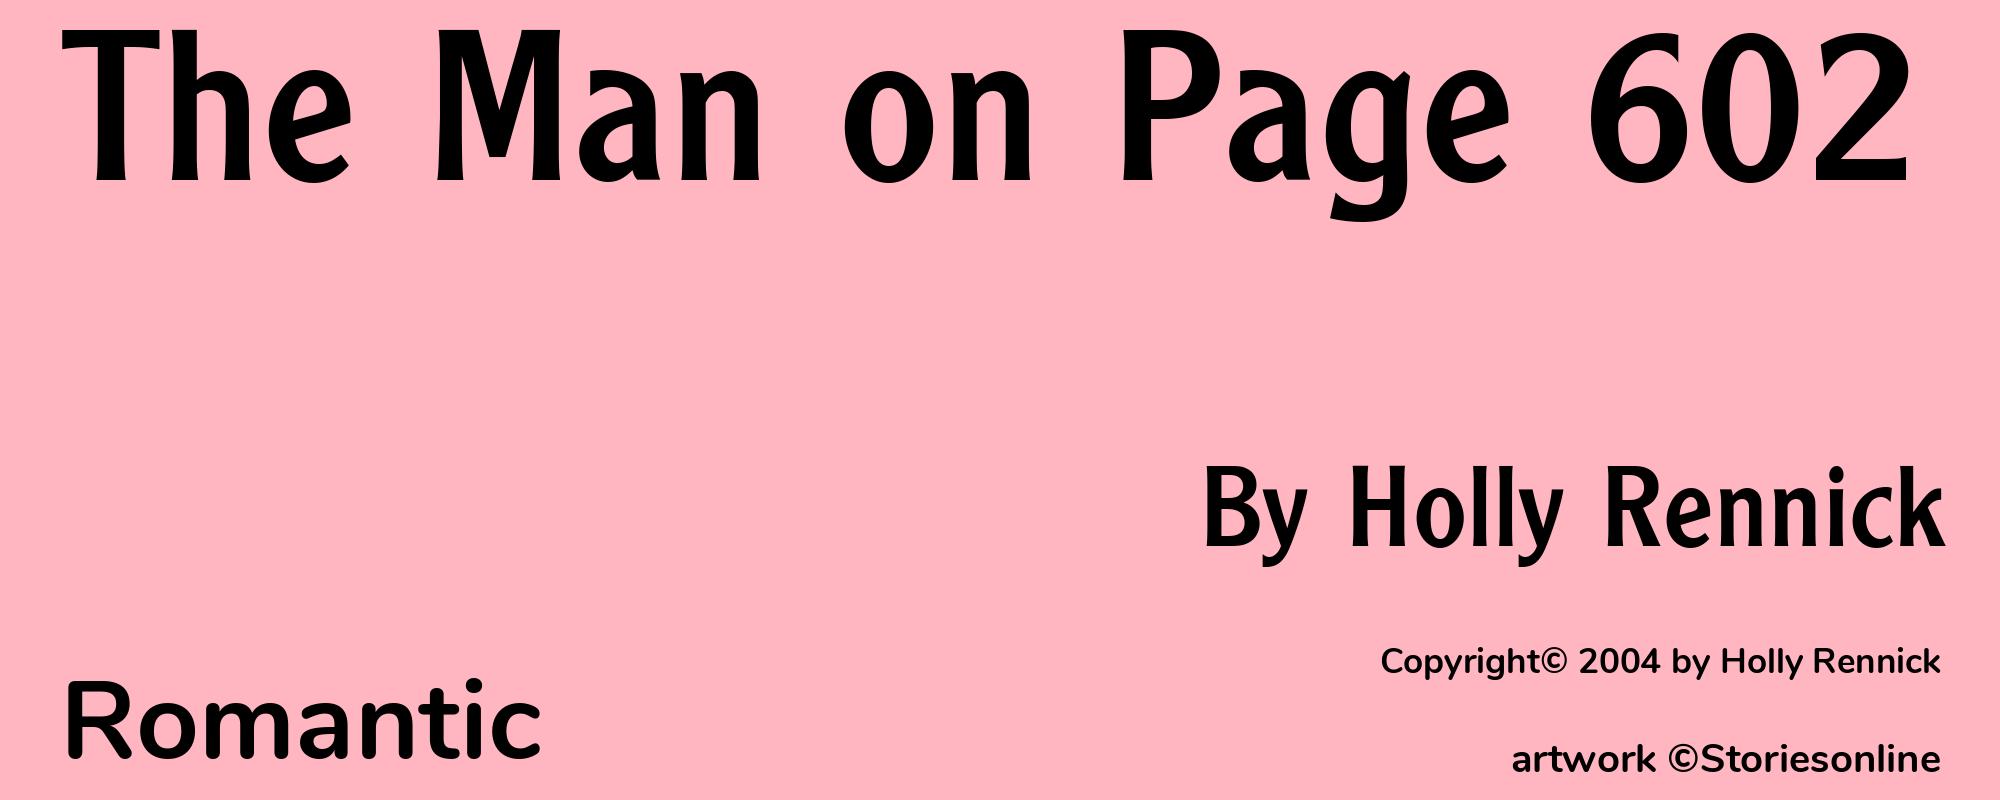 The Man on Page 602 - Cover